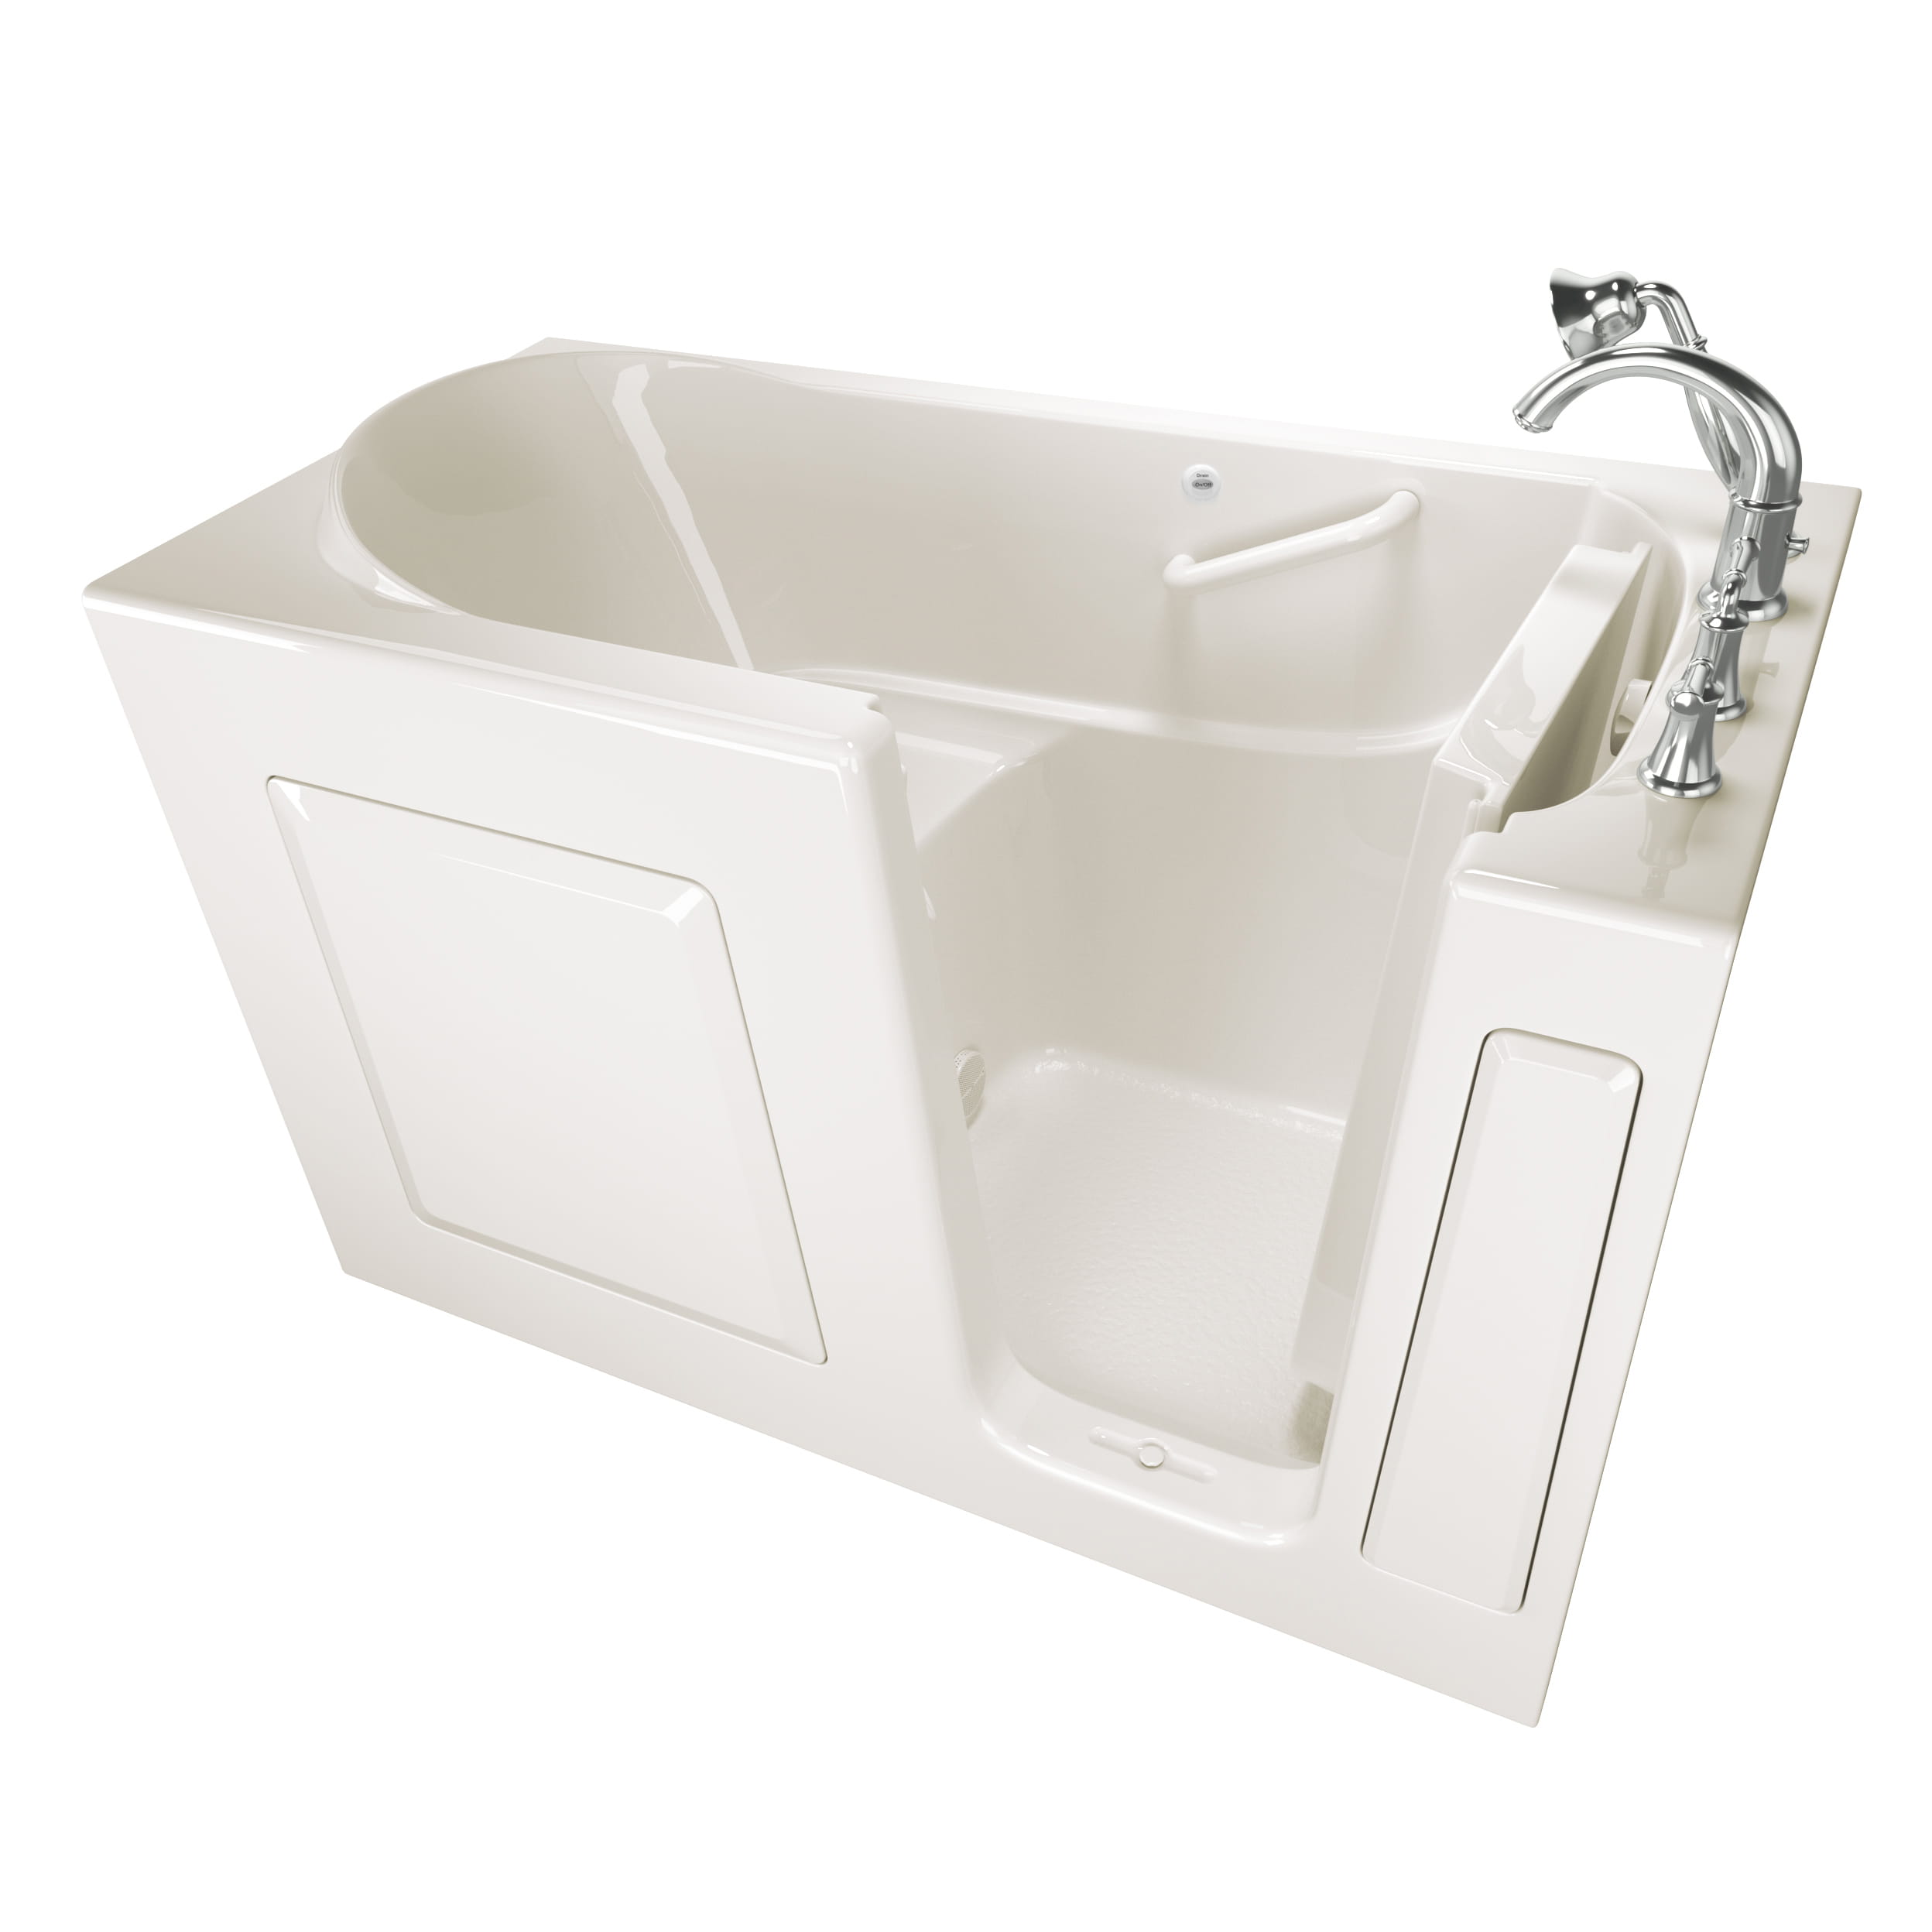 Gelcoat Value Series 30 x 60  Inch Walk in Tub With Soaker System   Right Hand Drain With Faucet WIB LINEN